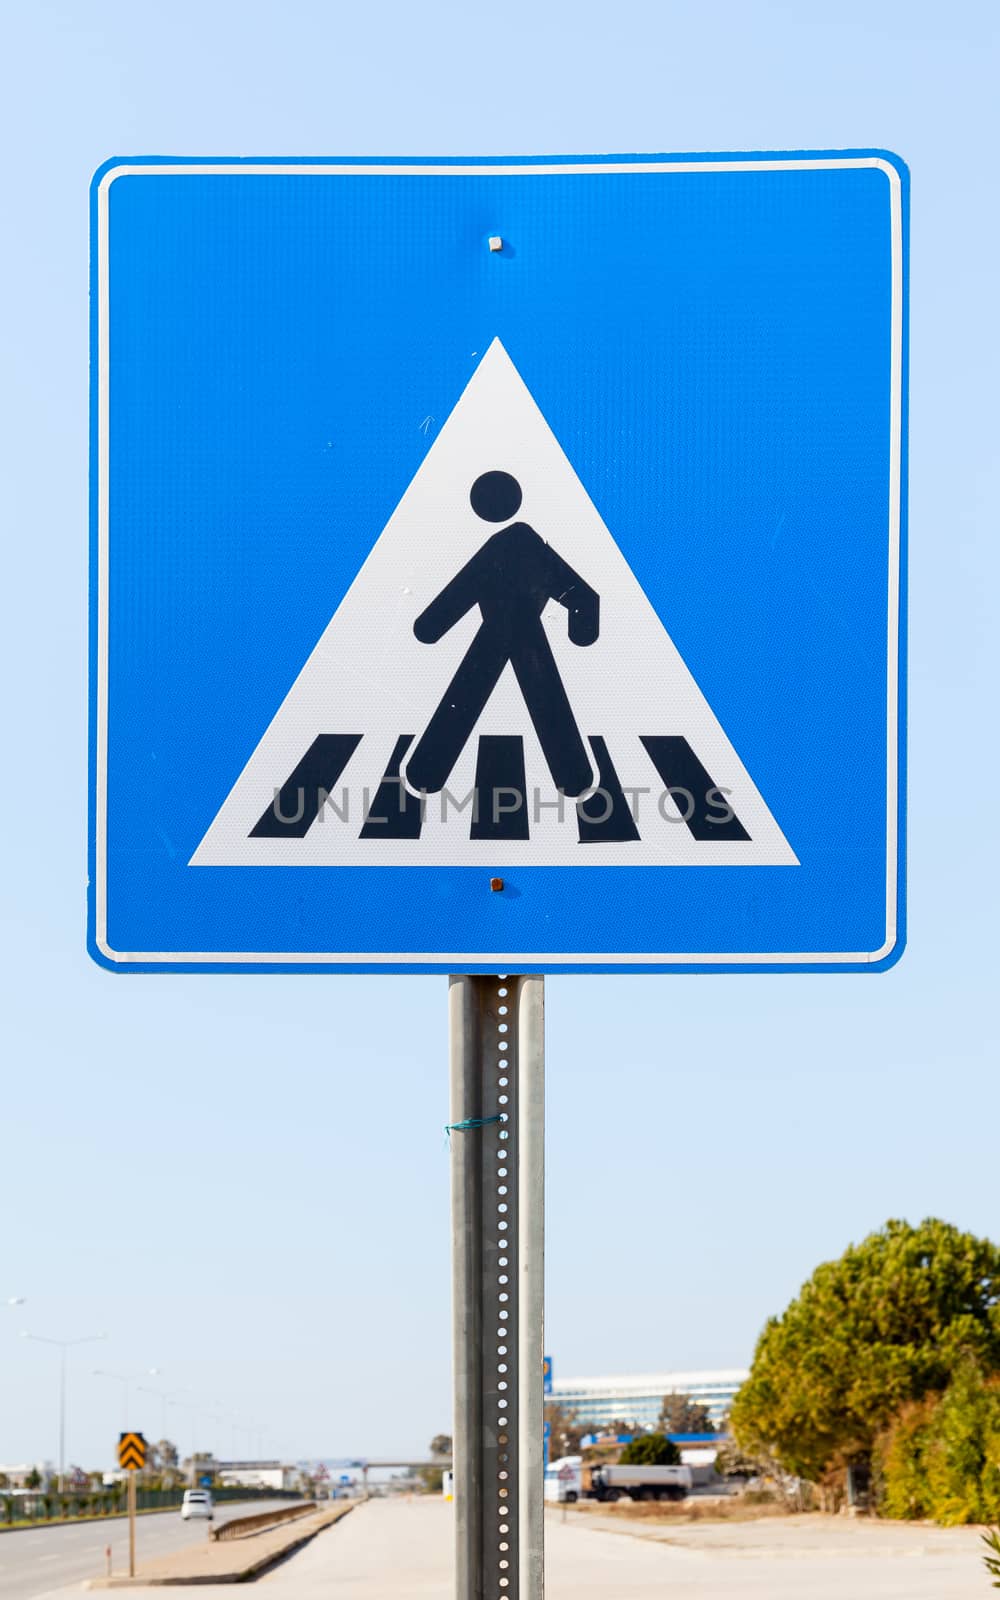 Pedestrian Crossing by ATGImages